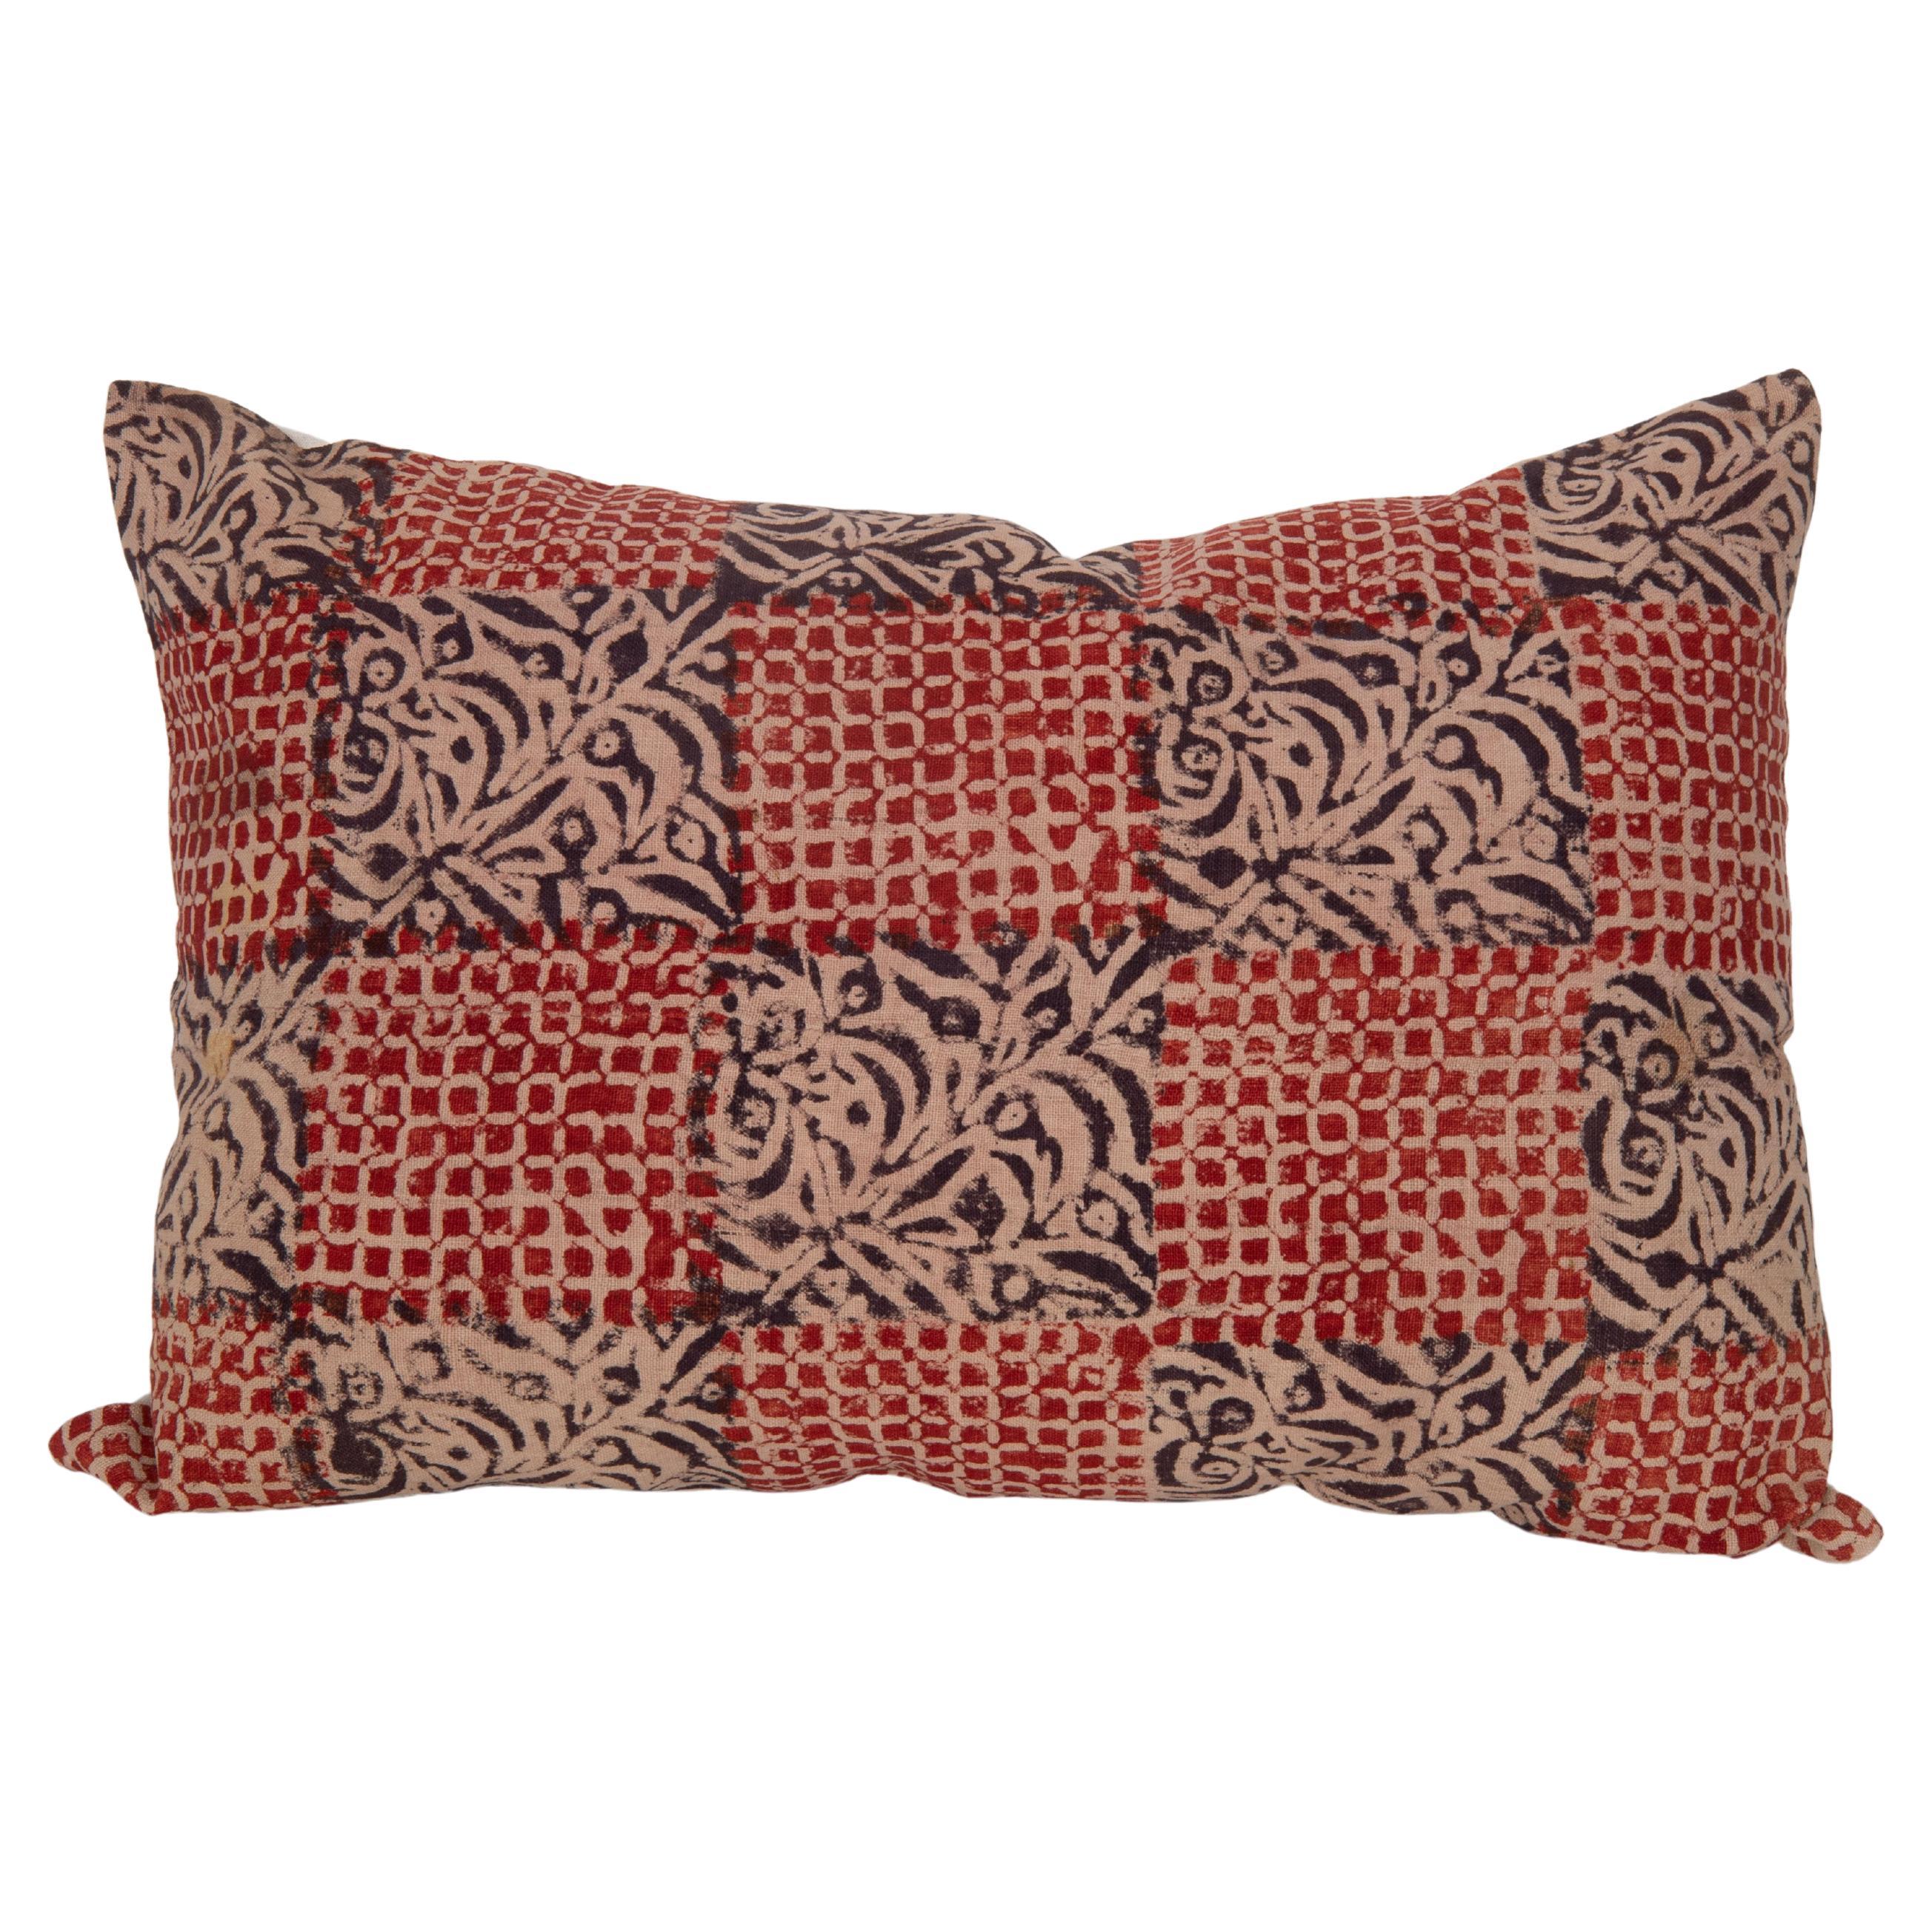 Cushion Cover Made From an Uzbek Hand Block Printed Panel For Sale